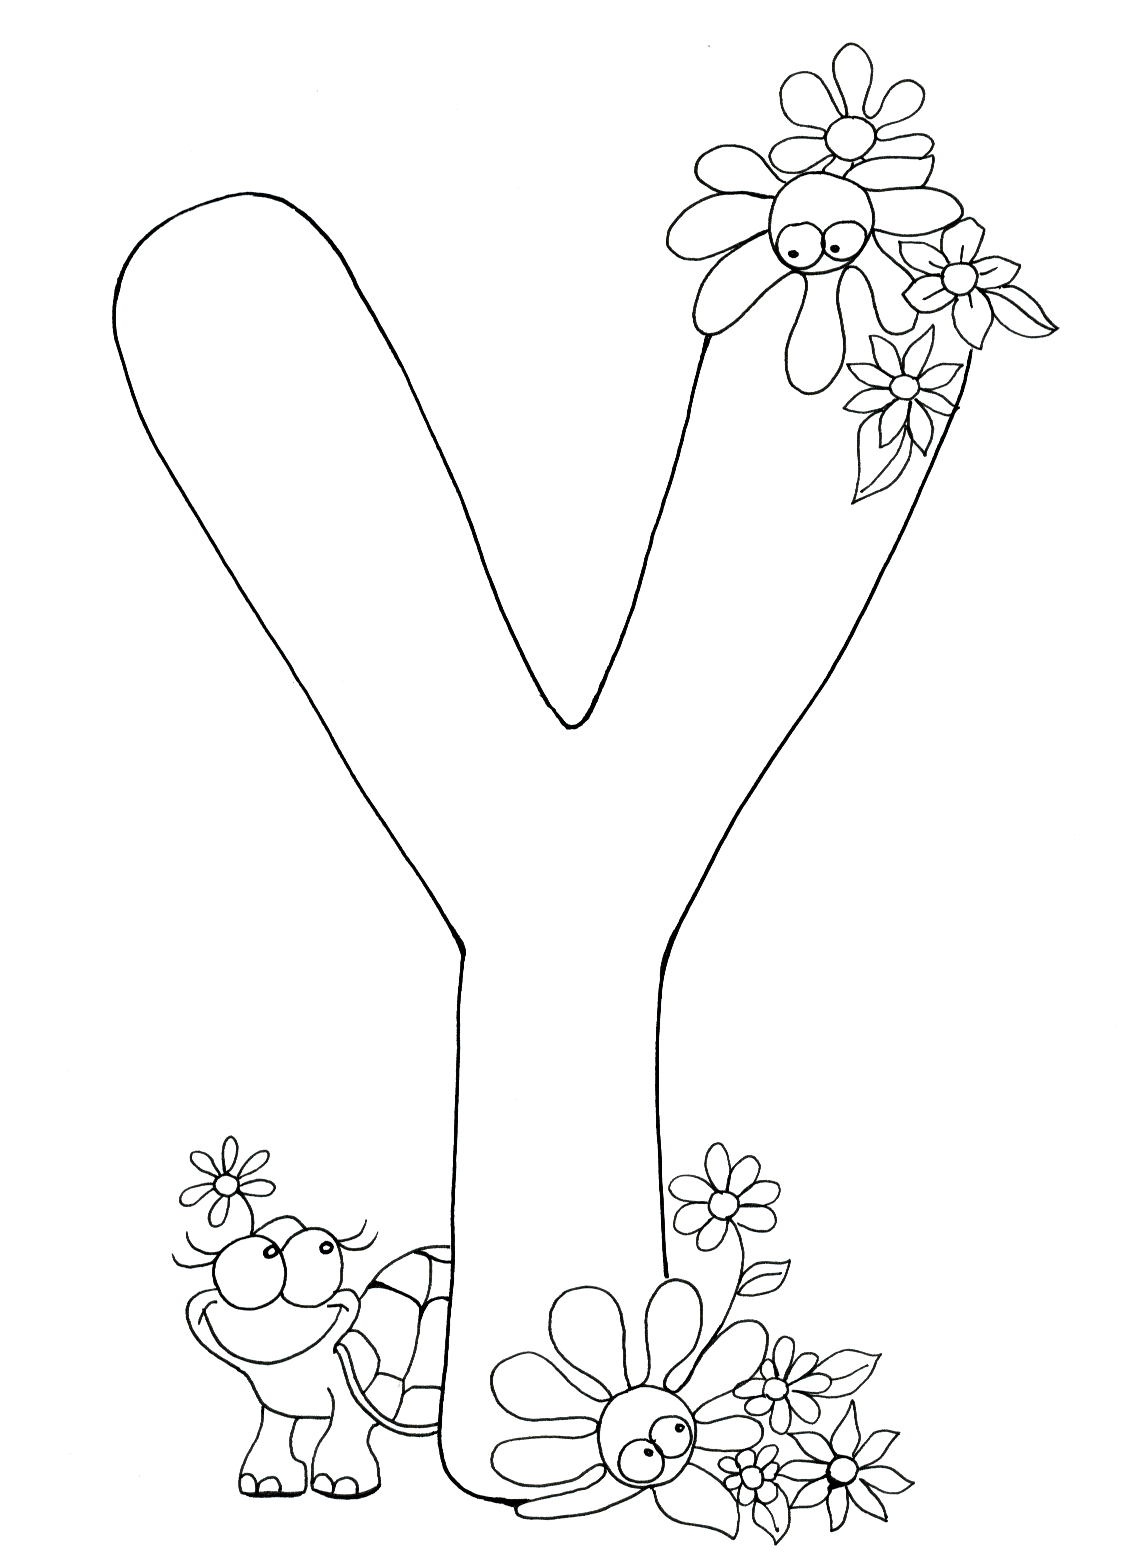 y coloring pages for kids - photo #18